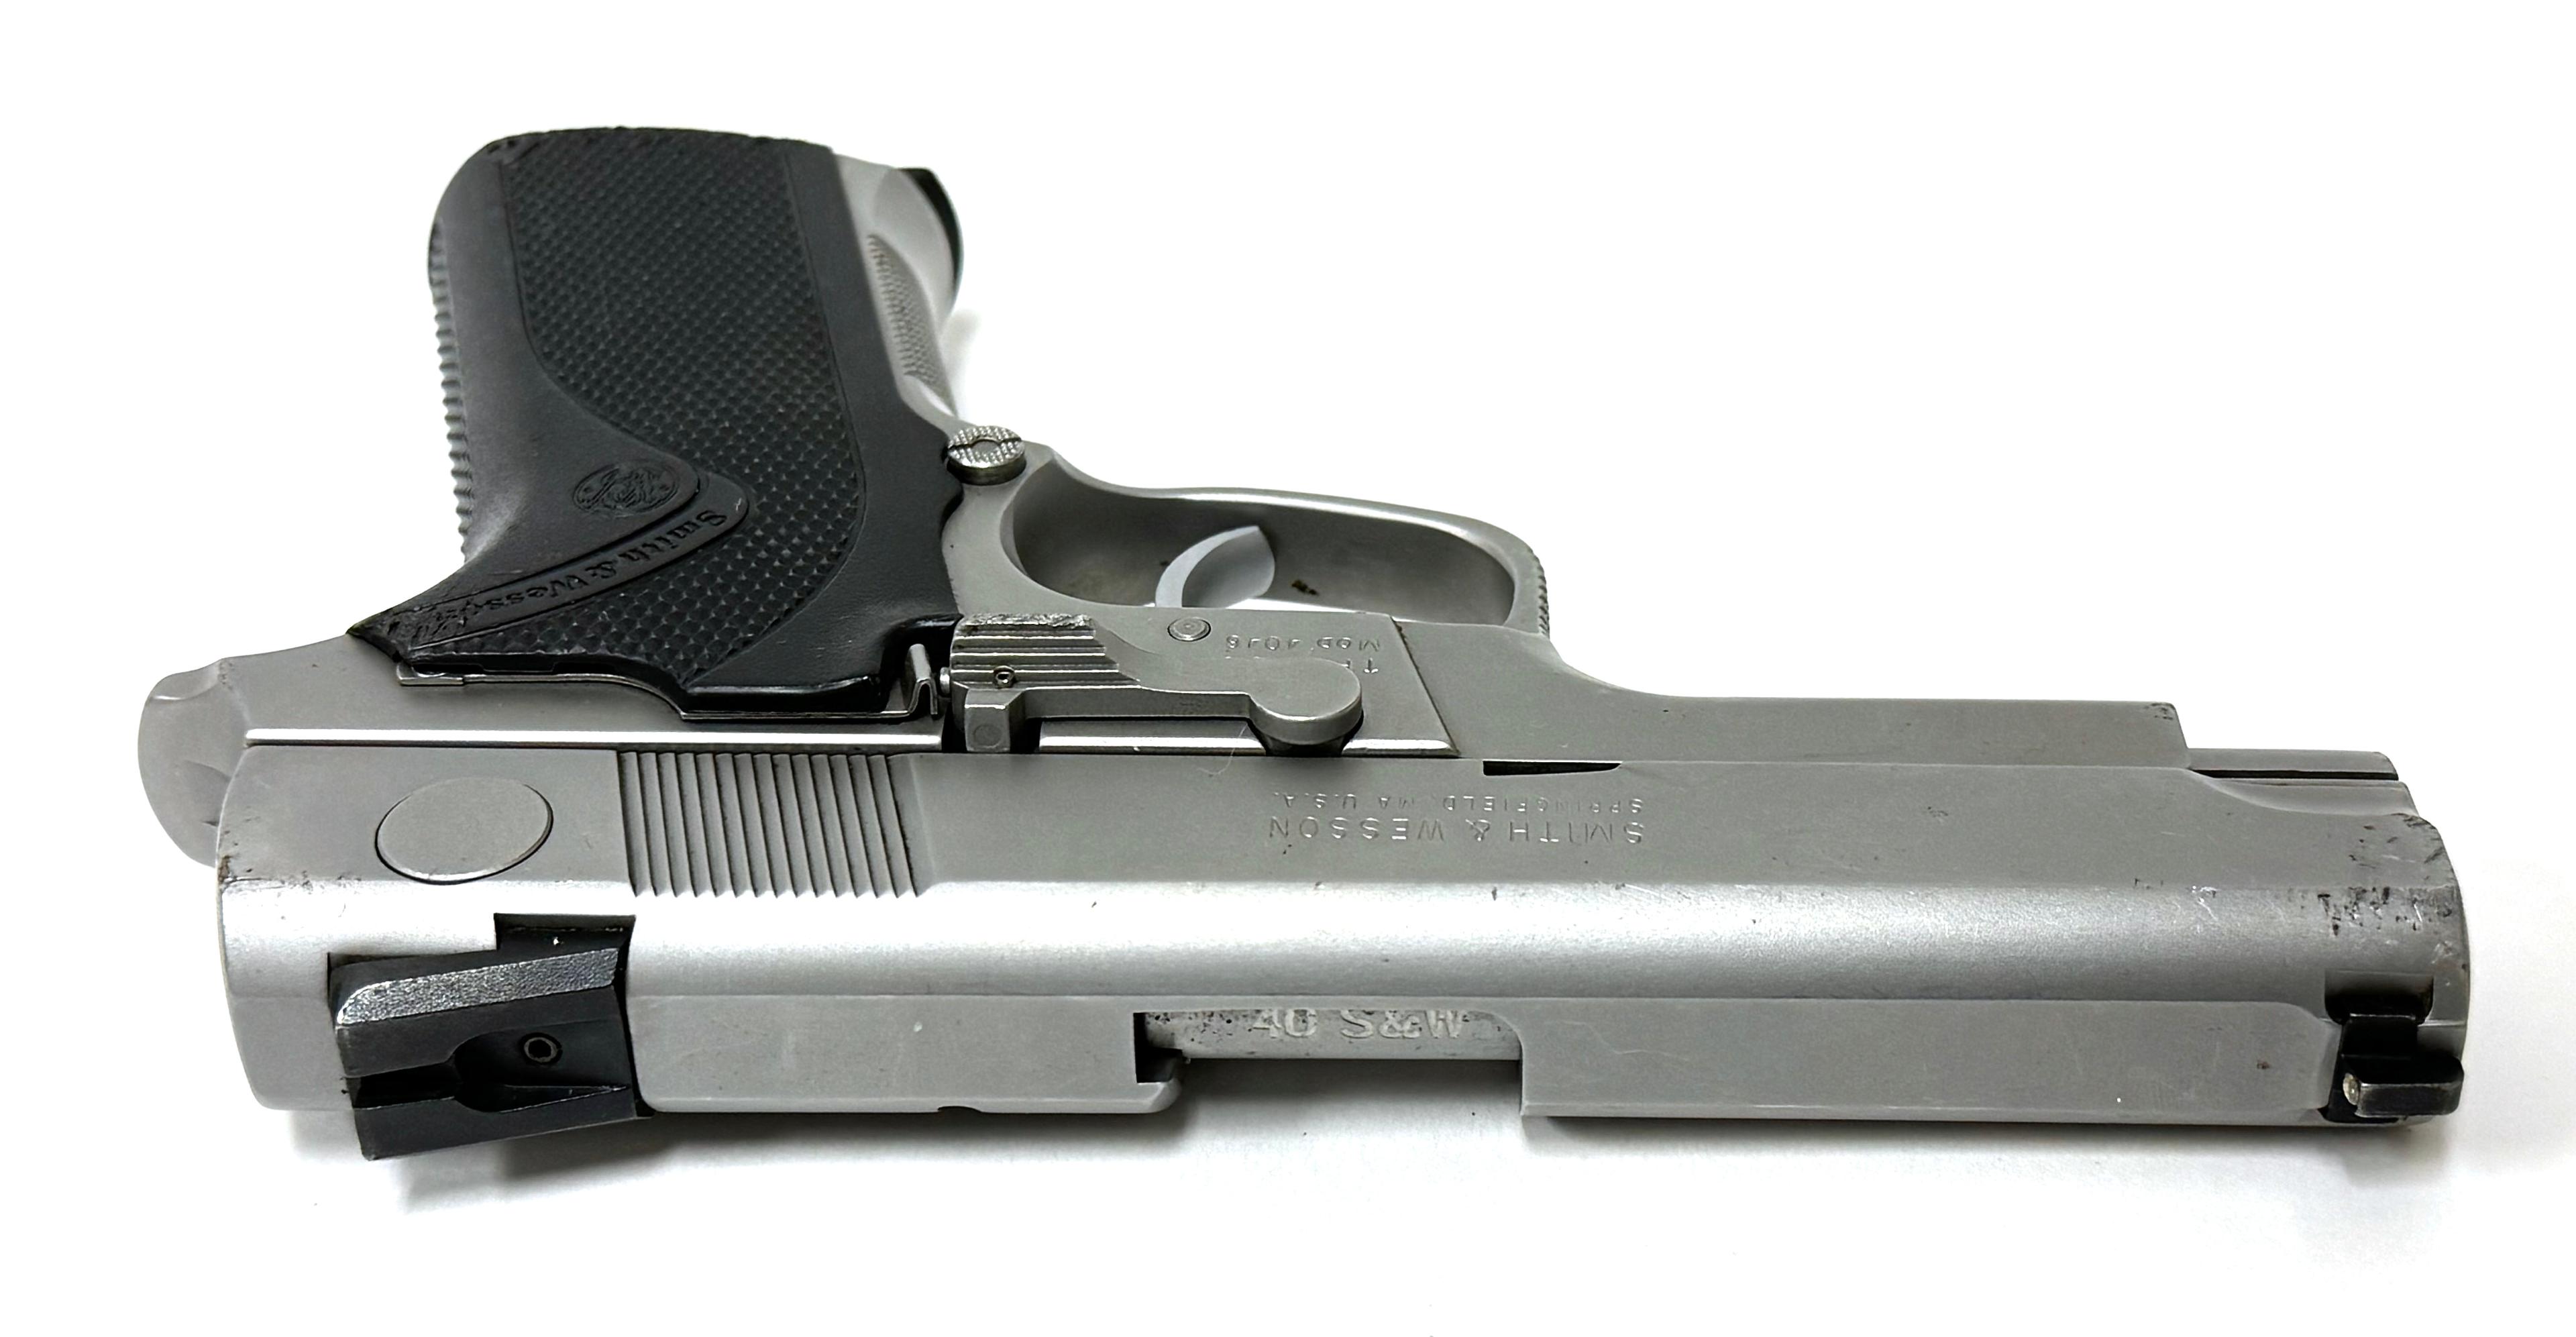 Smith & Wesson Model 4046 .40 S&W Stainless Steel Semi-Automatic Pistol